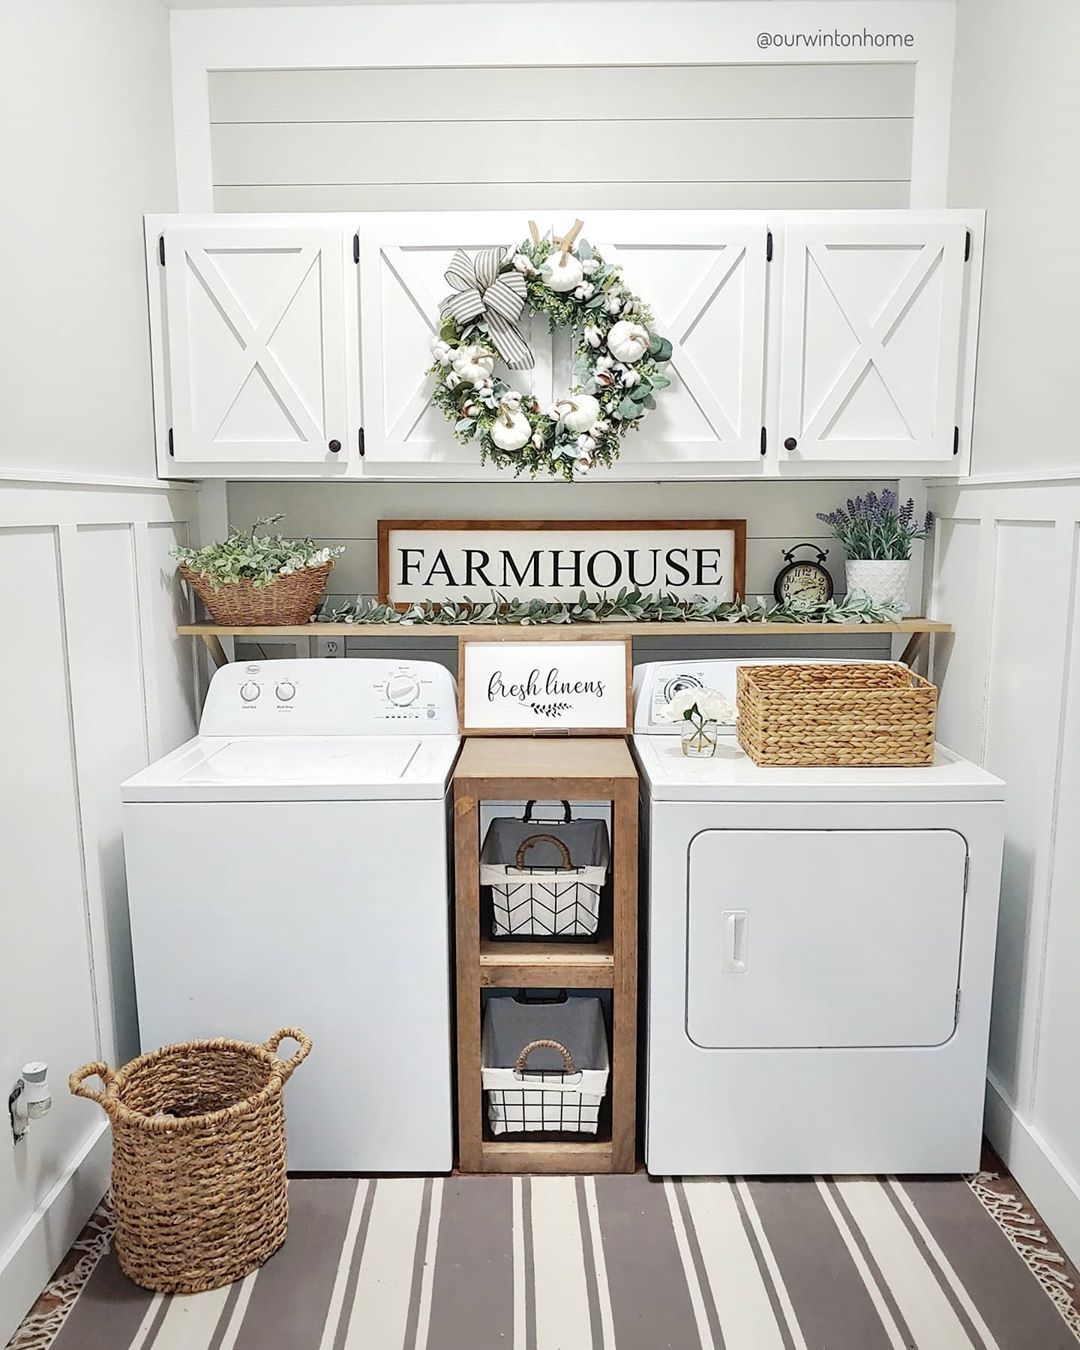 Farmhouse Laundry Room with Striped Cotton Rug and Woven Baskets via @ourwintonhome